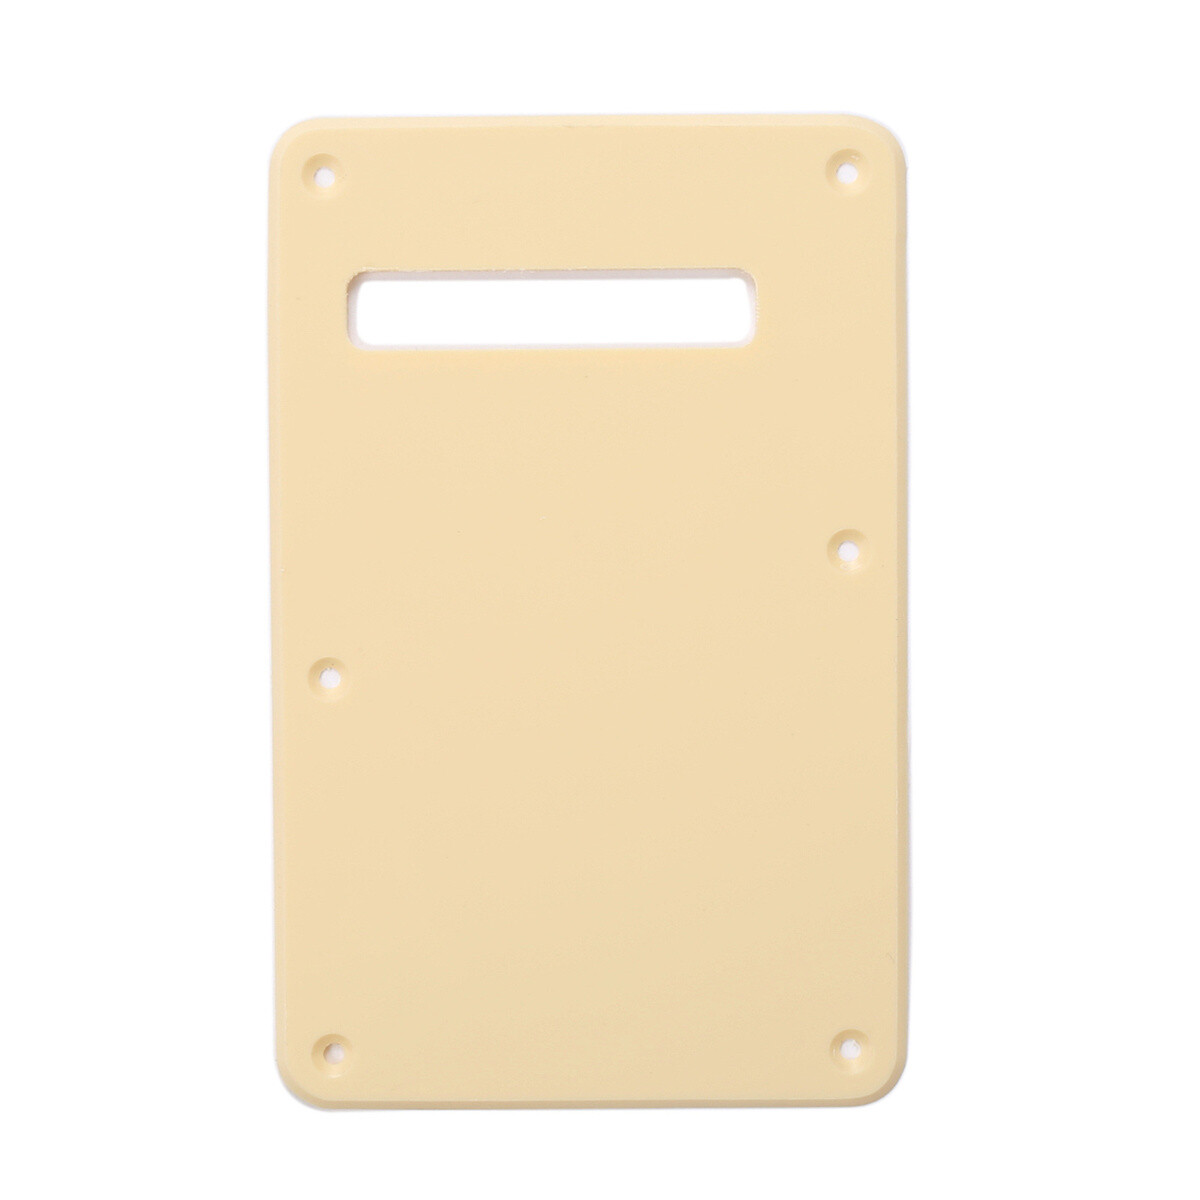 Brio Cream Modern Style Back Plate Tremolo Cover 1 ply - US/Mexican Fender®Strat® Fit